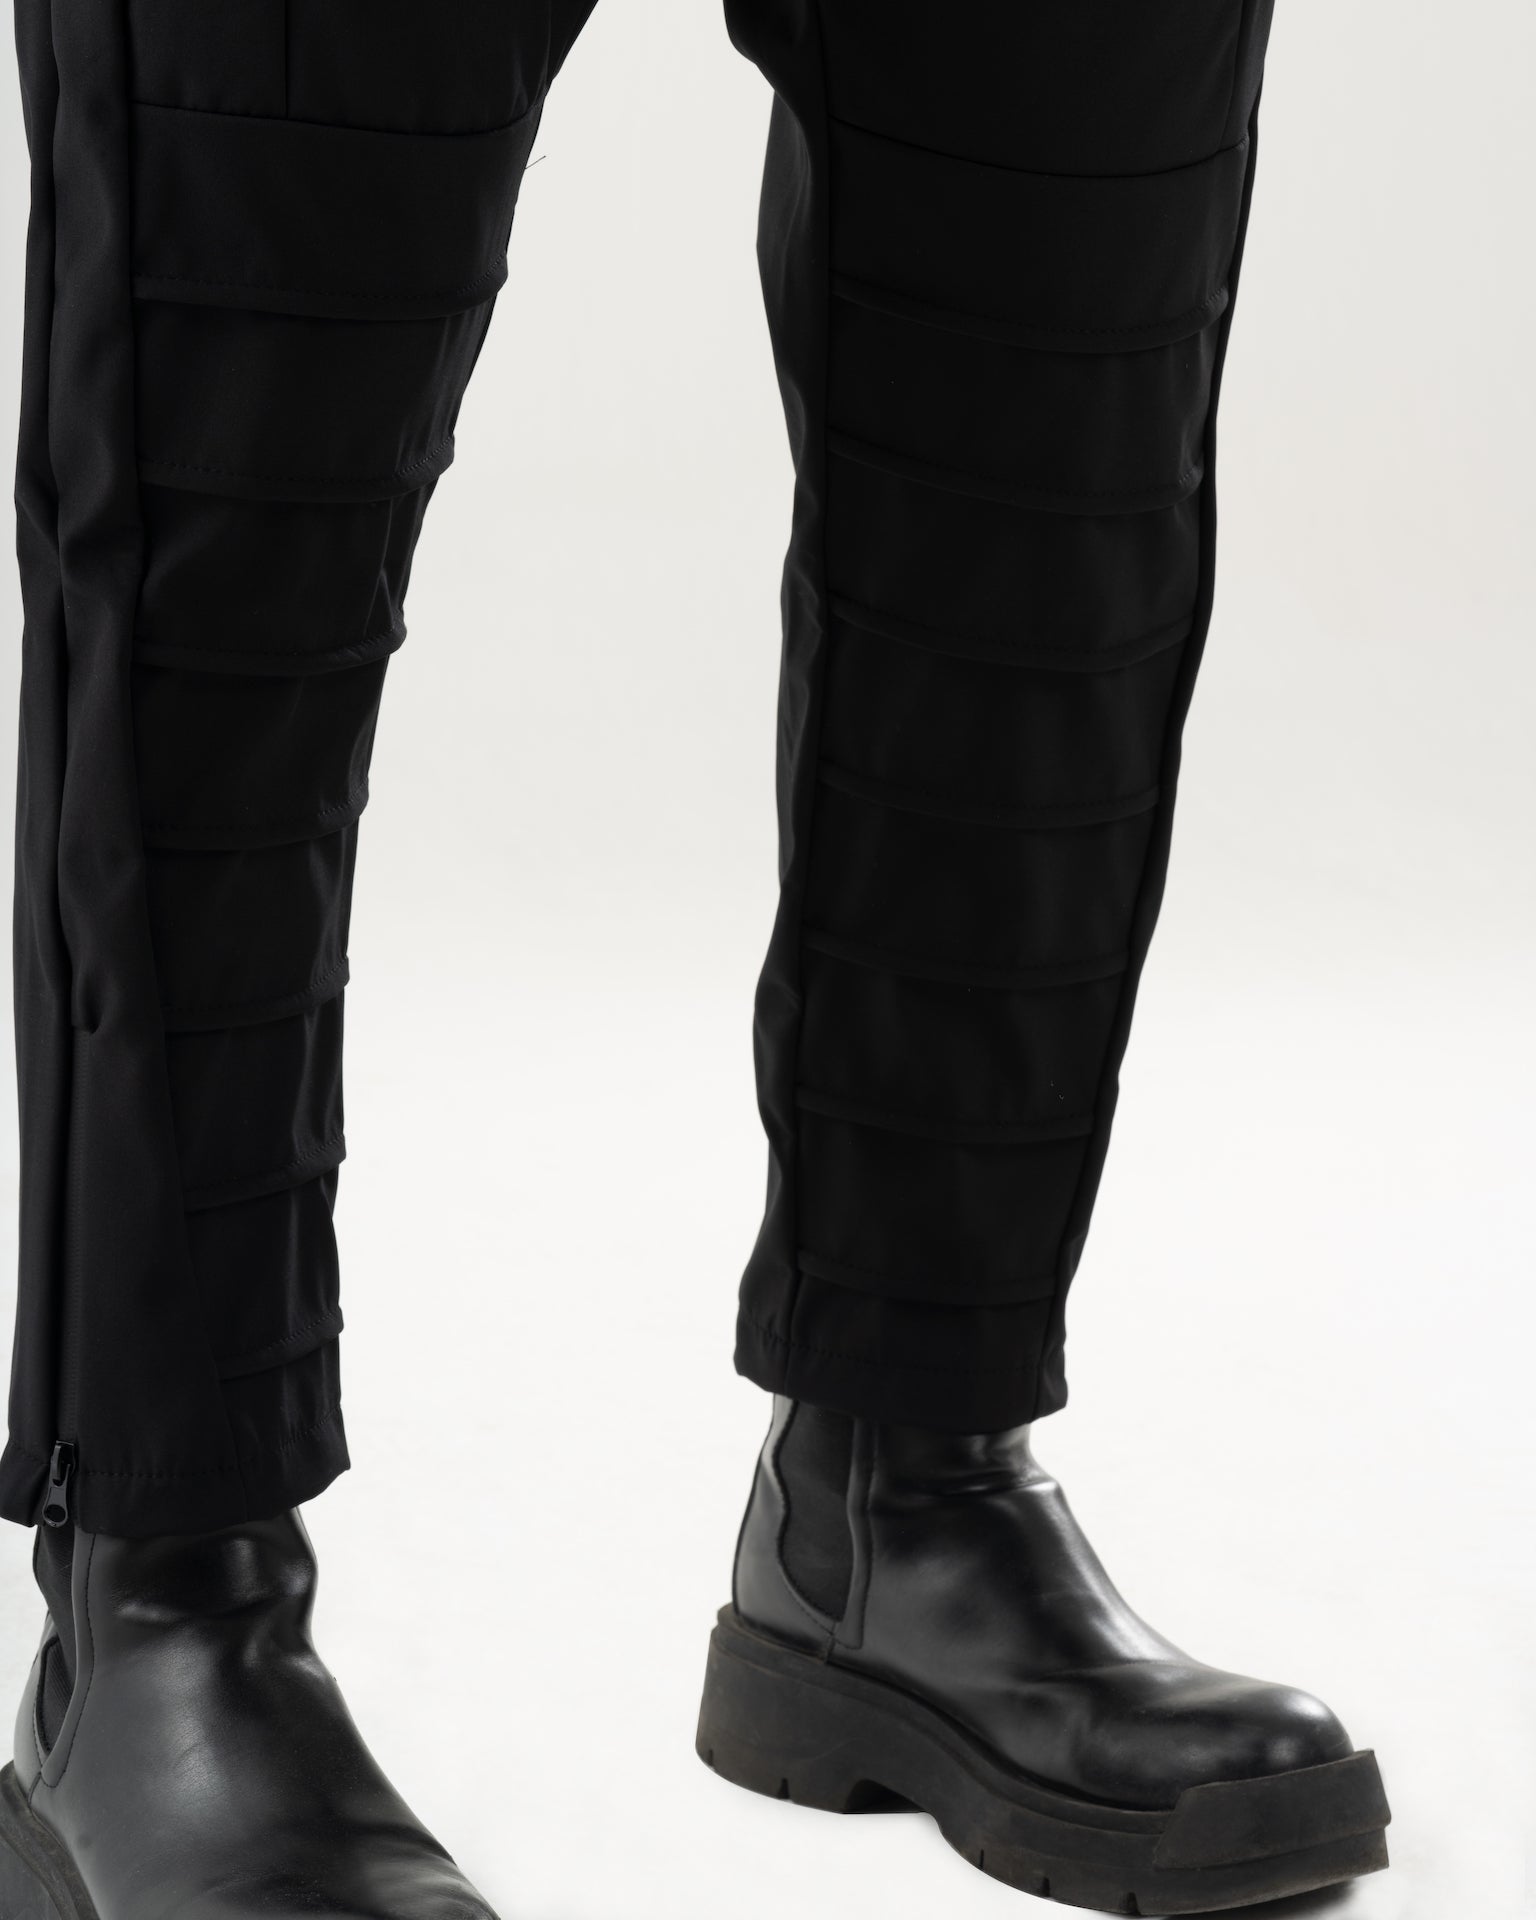 A man wearing INVOGUE JOGGERS and black boots.